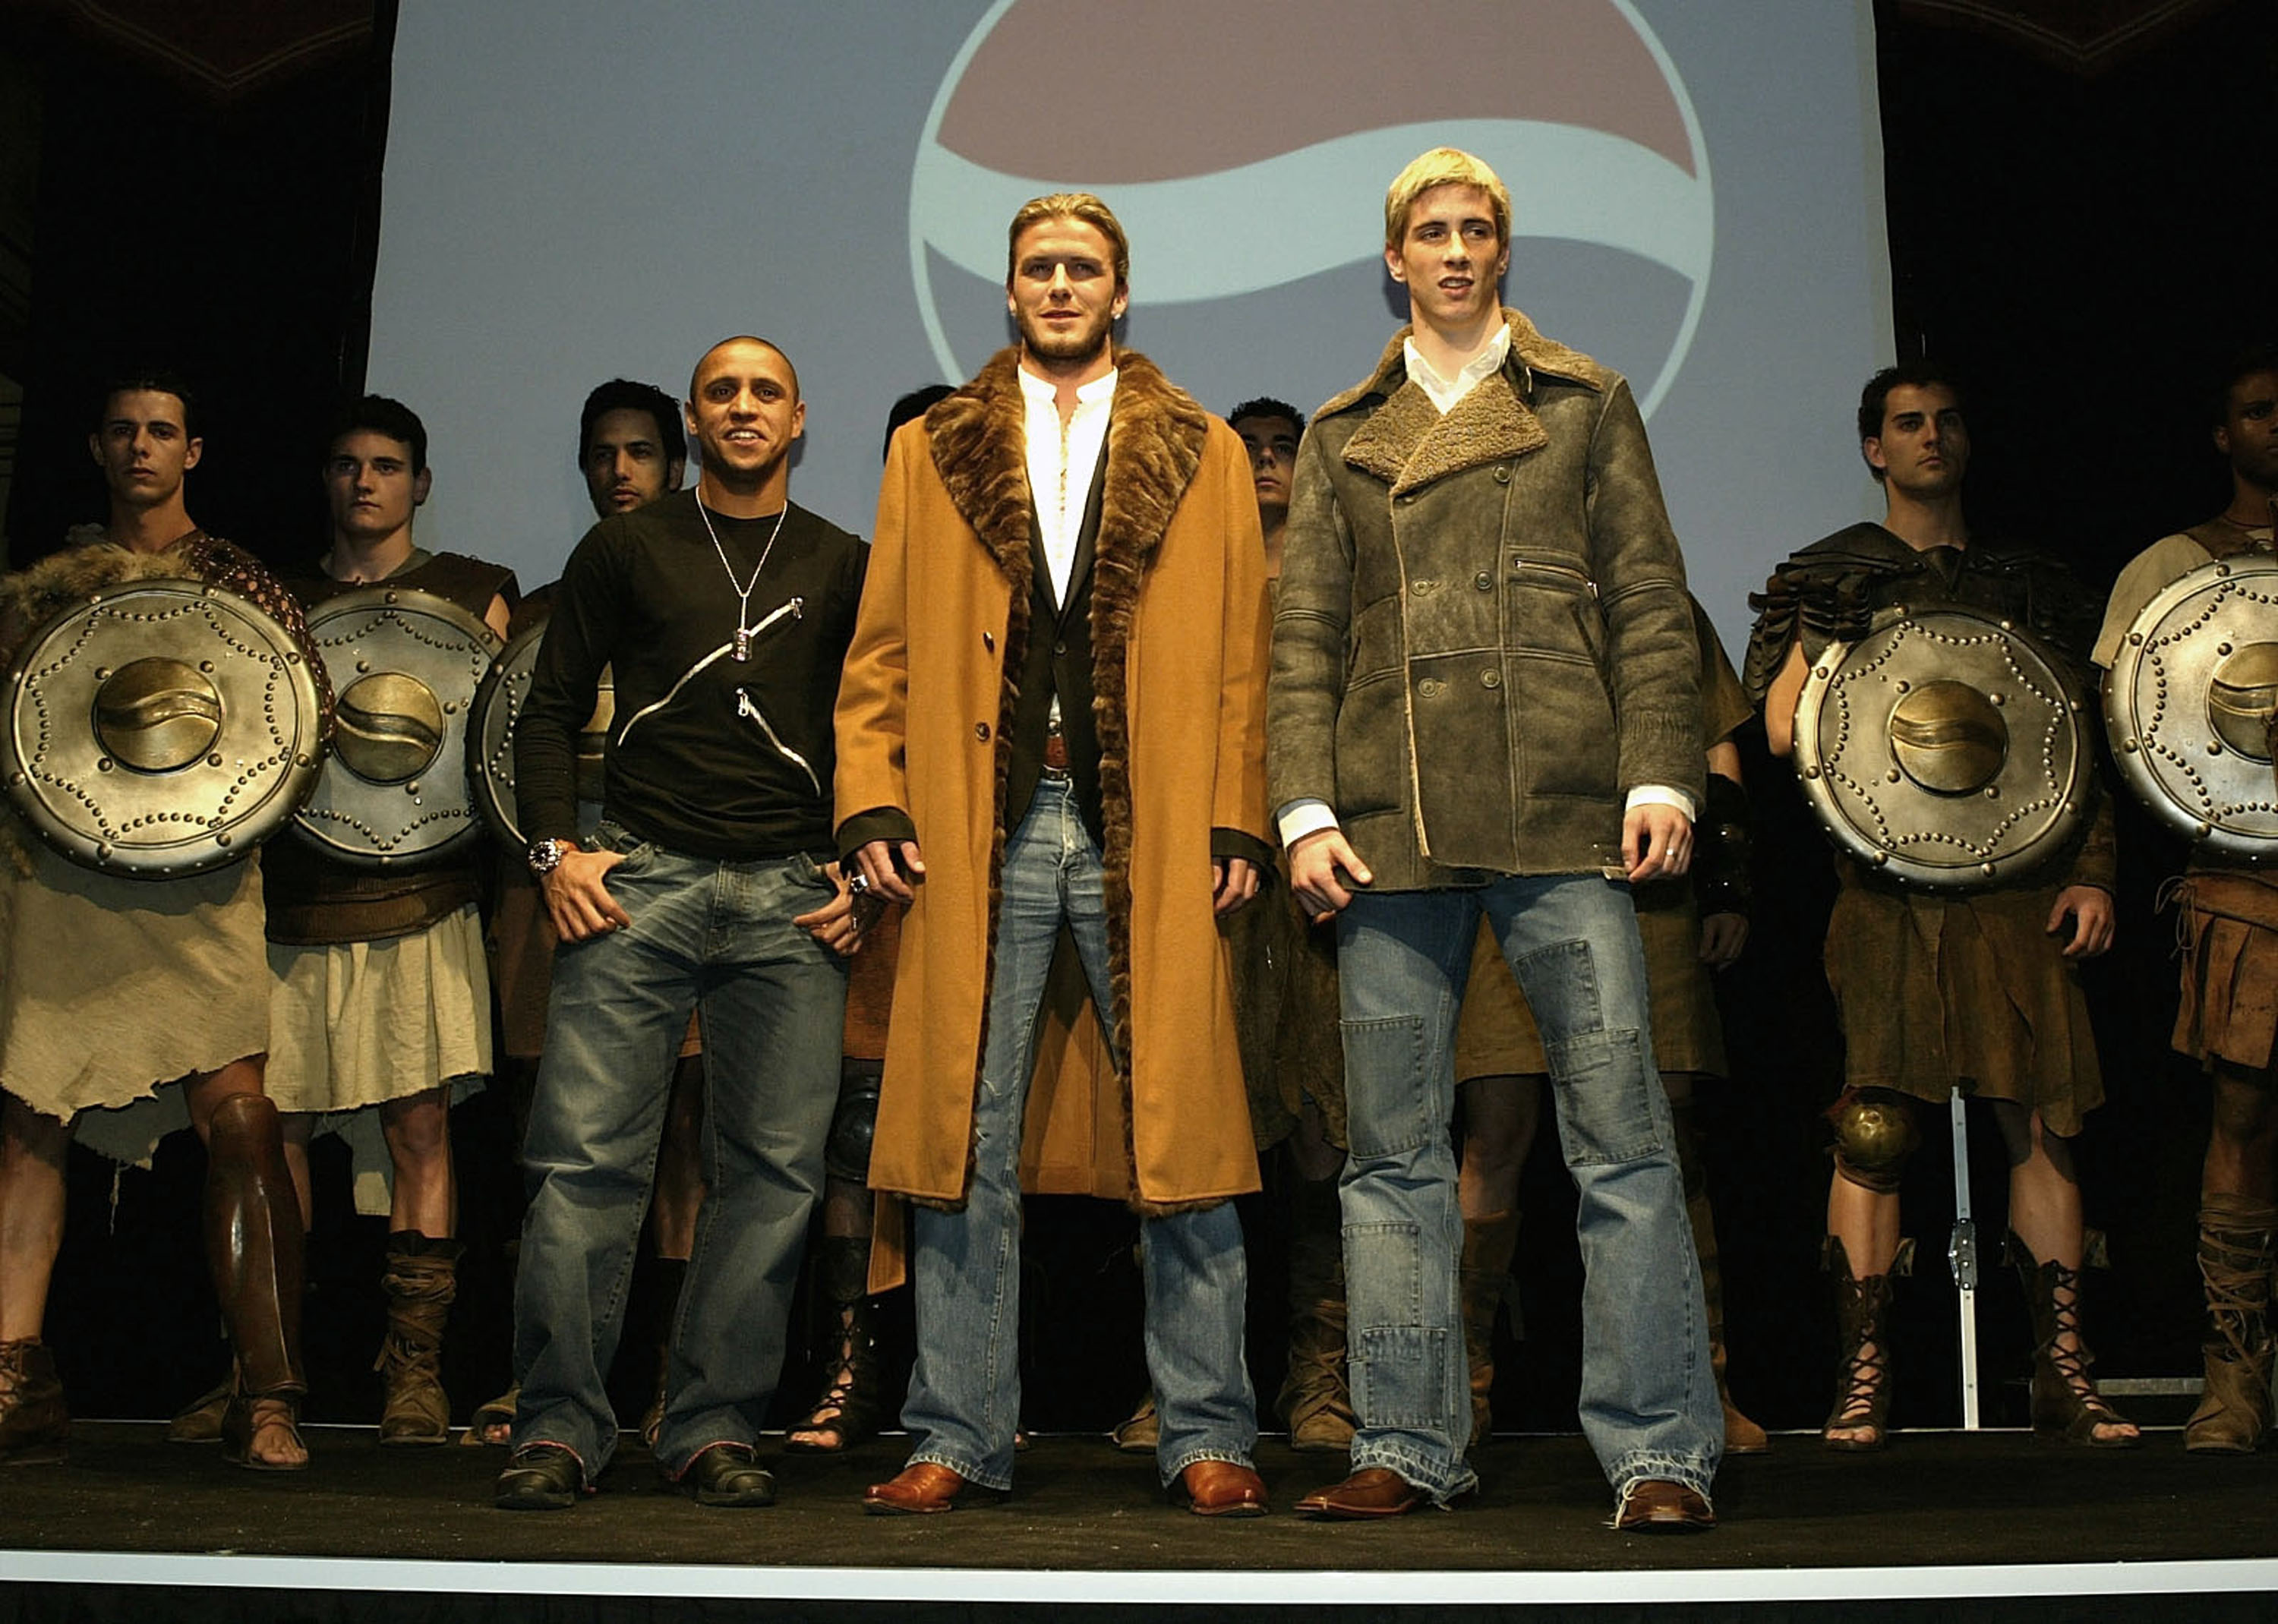 MADRID, SPAIN - FEBRUARY 26:  Footballers Roberto Carlos, David Beckham and Fernando Torres pose during the Premiere of the new Pepsi Football Commercial 'Pepsi Foot Battle' at the Palacio Gaviria on February 26, 2004 in Madrid, Spain. (Photo by Clive Bru